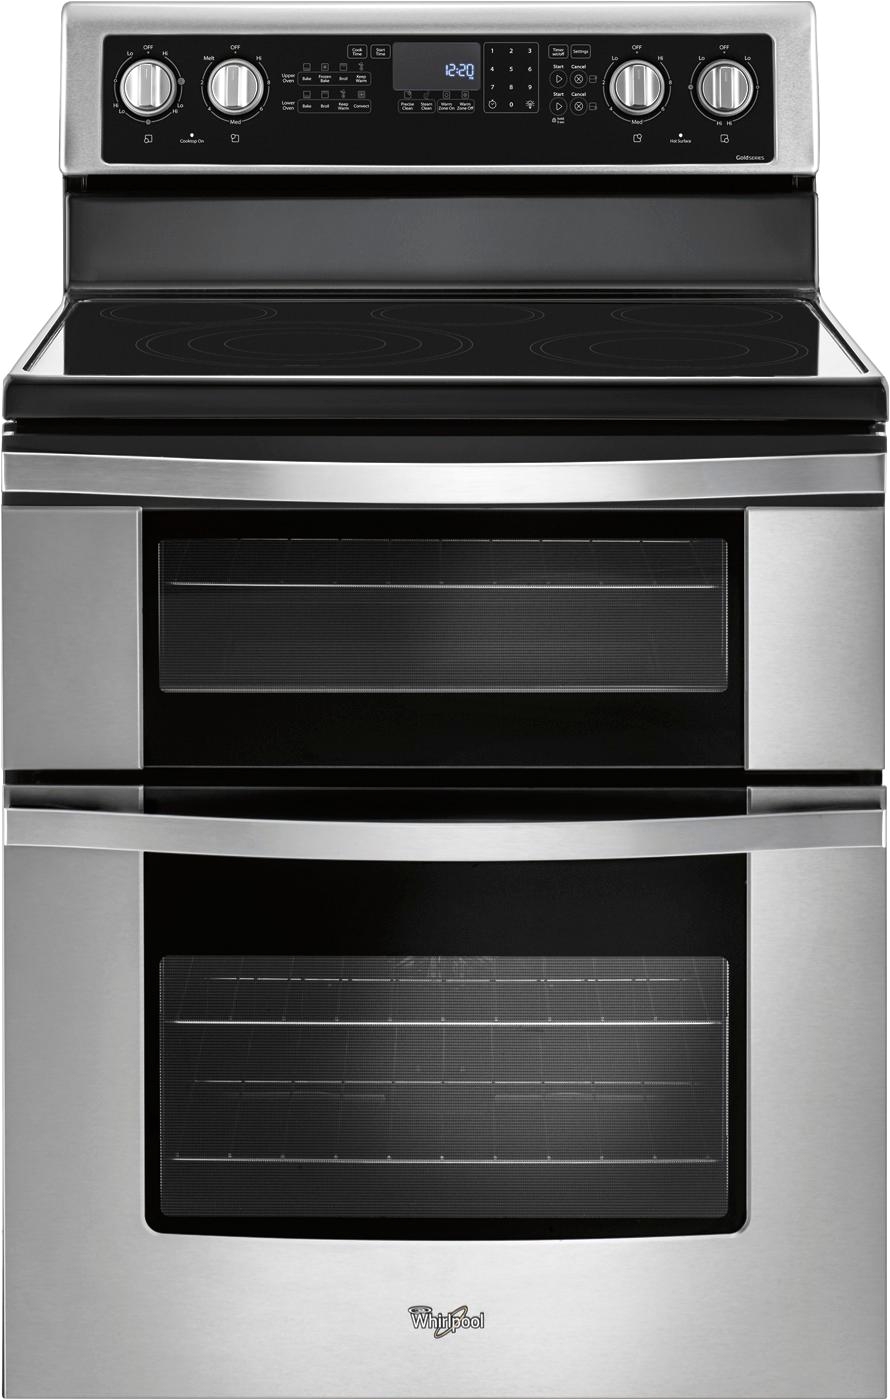 ft self cleaning freestanding double oven electric convection range silver wge745c0fs best buy